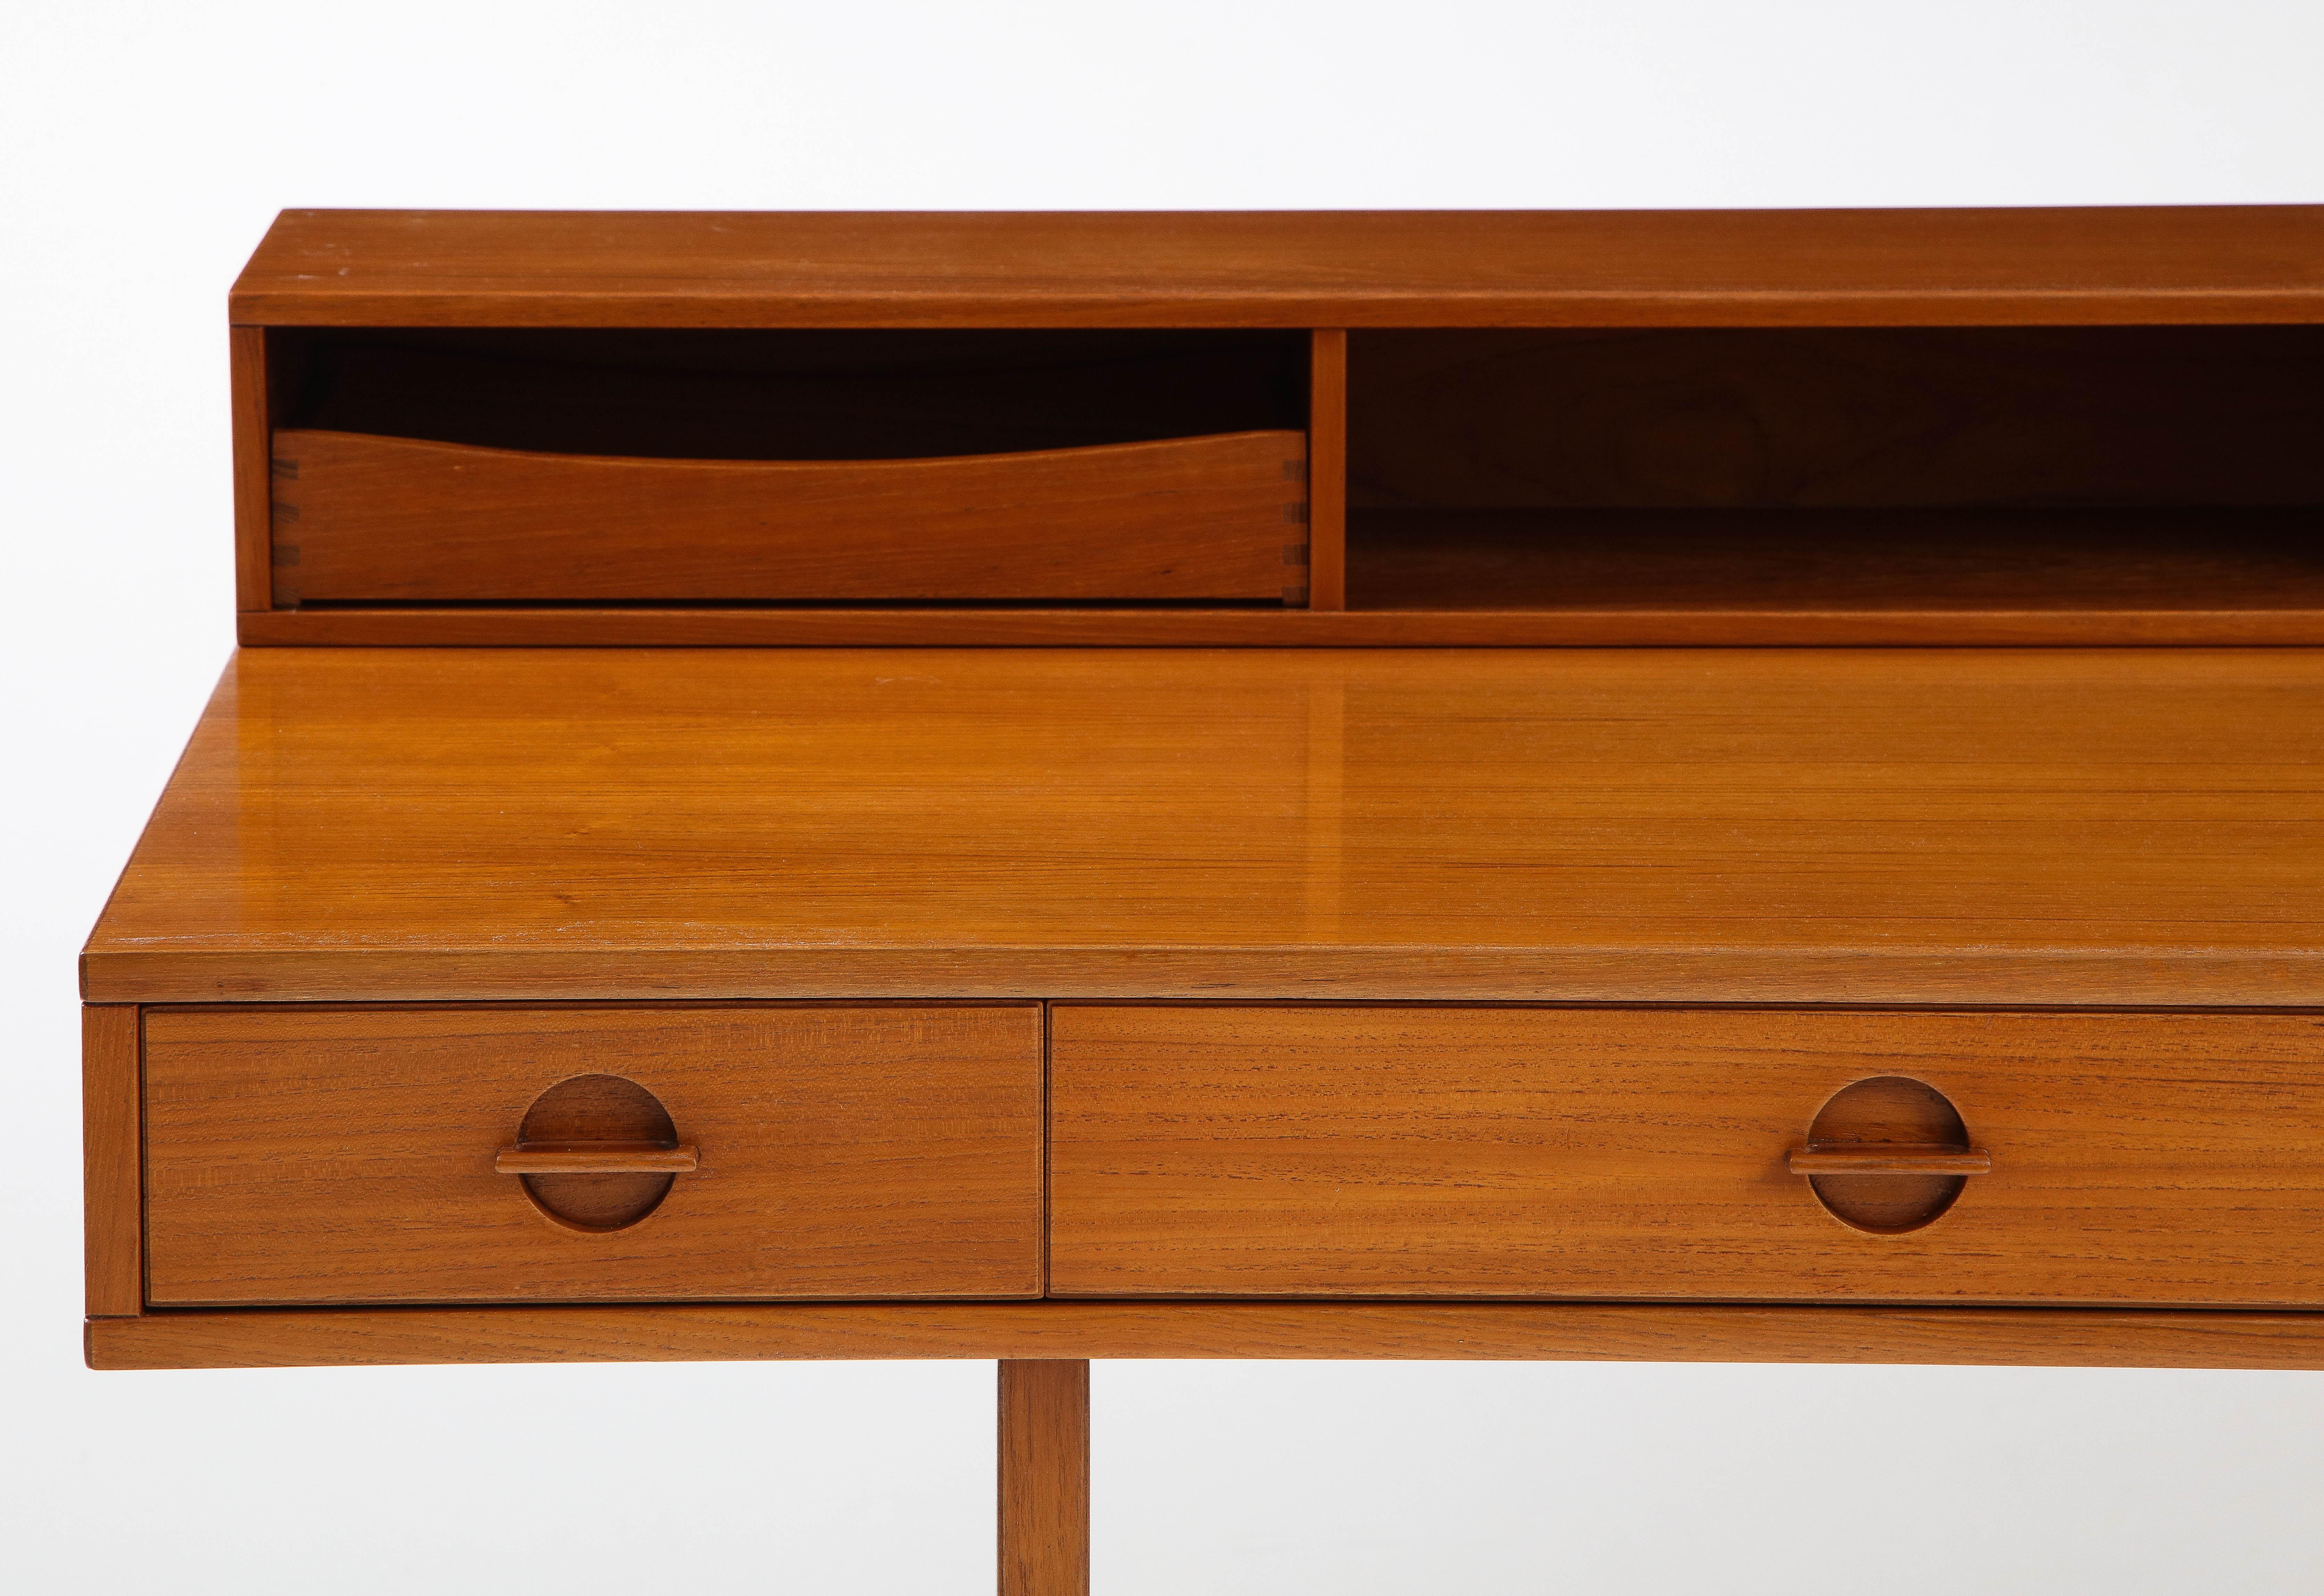 Stunning 1970's Mid-Century Modern teak flip top executive teak desk designed by Peter Lovig Nielsen for Dansk, fully restored with minor wear and patina due to age and use.